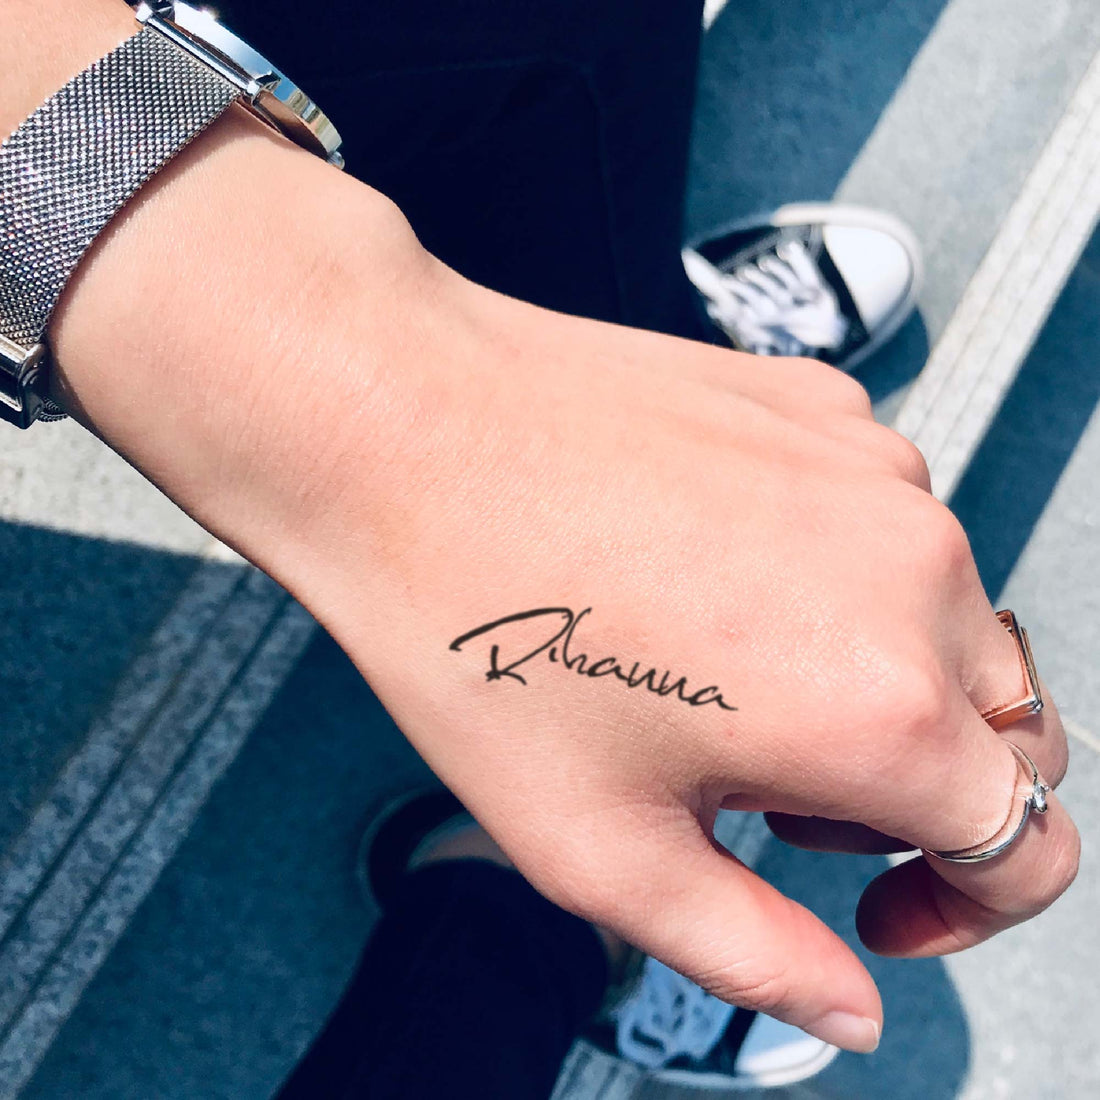 Rihanna custom temporary tattoo sticker design idea inspiration meanings removal arm wrist hand words font name signature calligraphy lyrics tour concert outfits merch accessory gift souvenir costumes wear dress up code